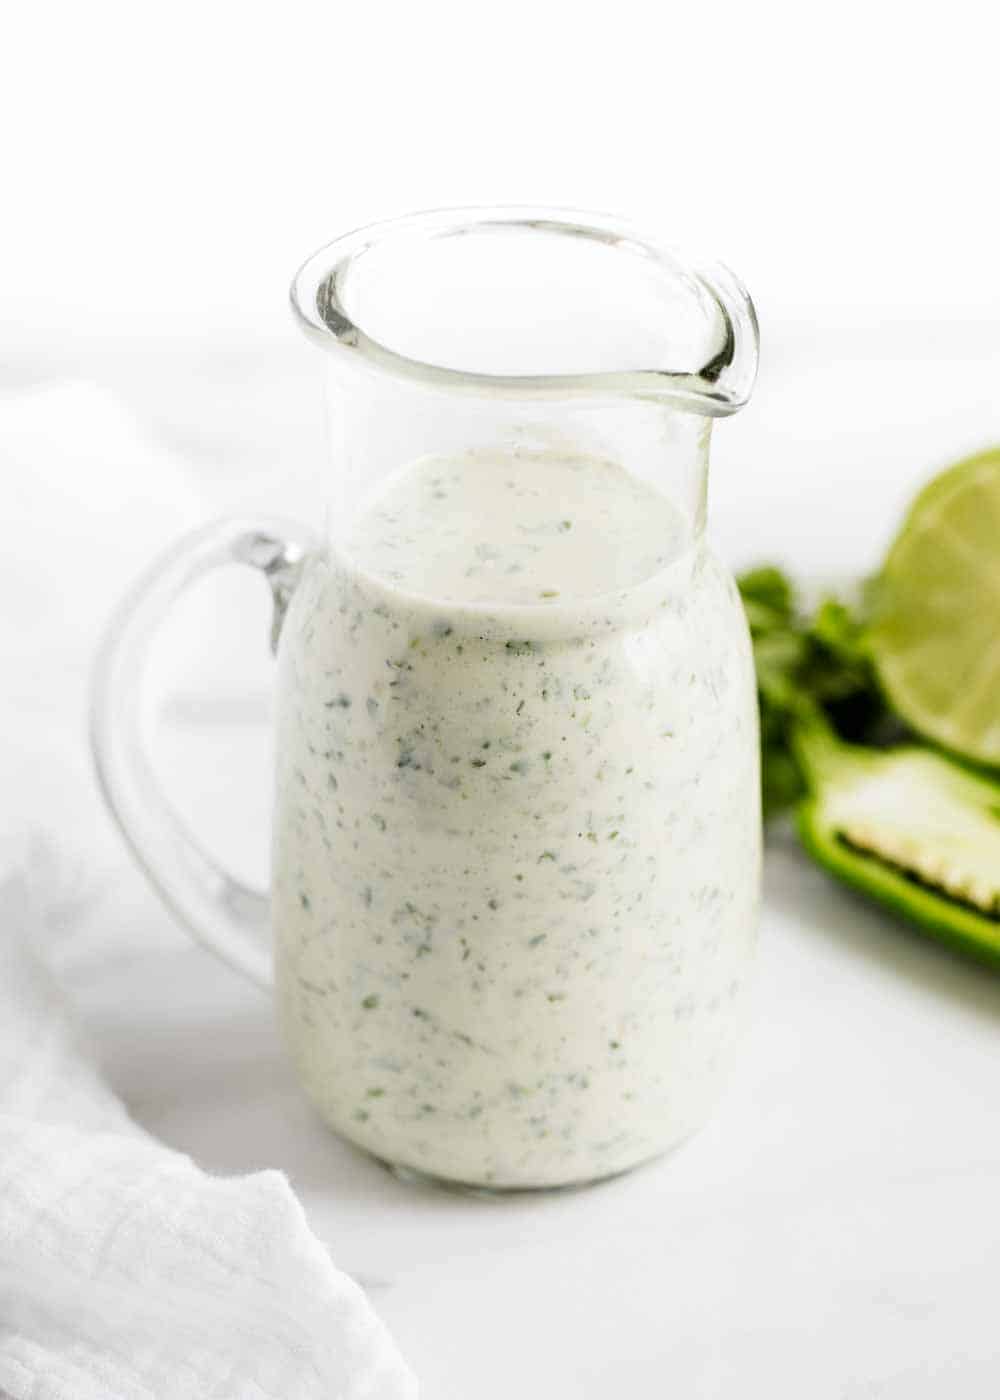 Cilantro lime dressing in glass jar.